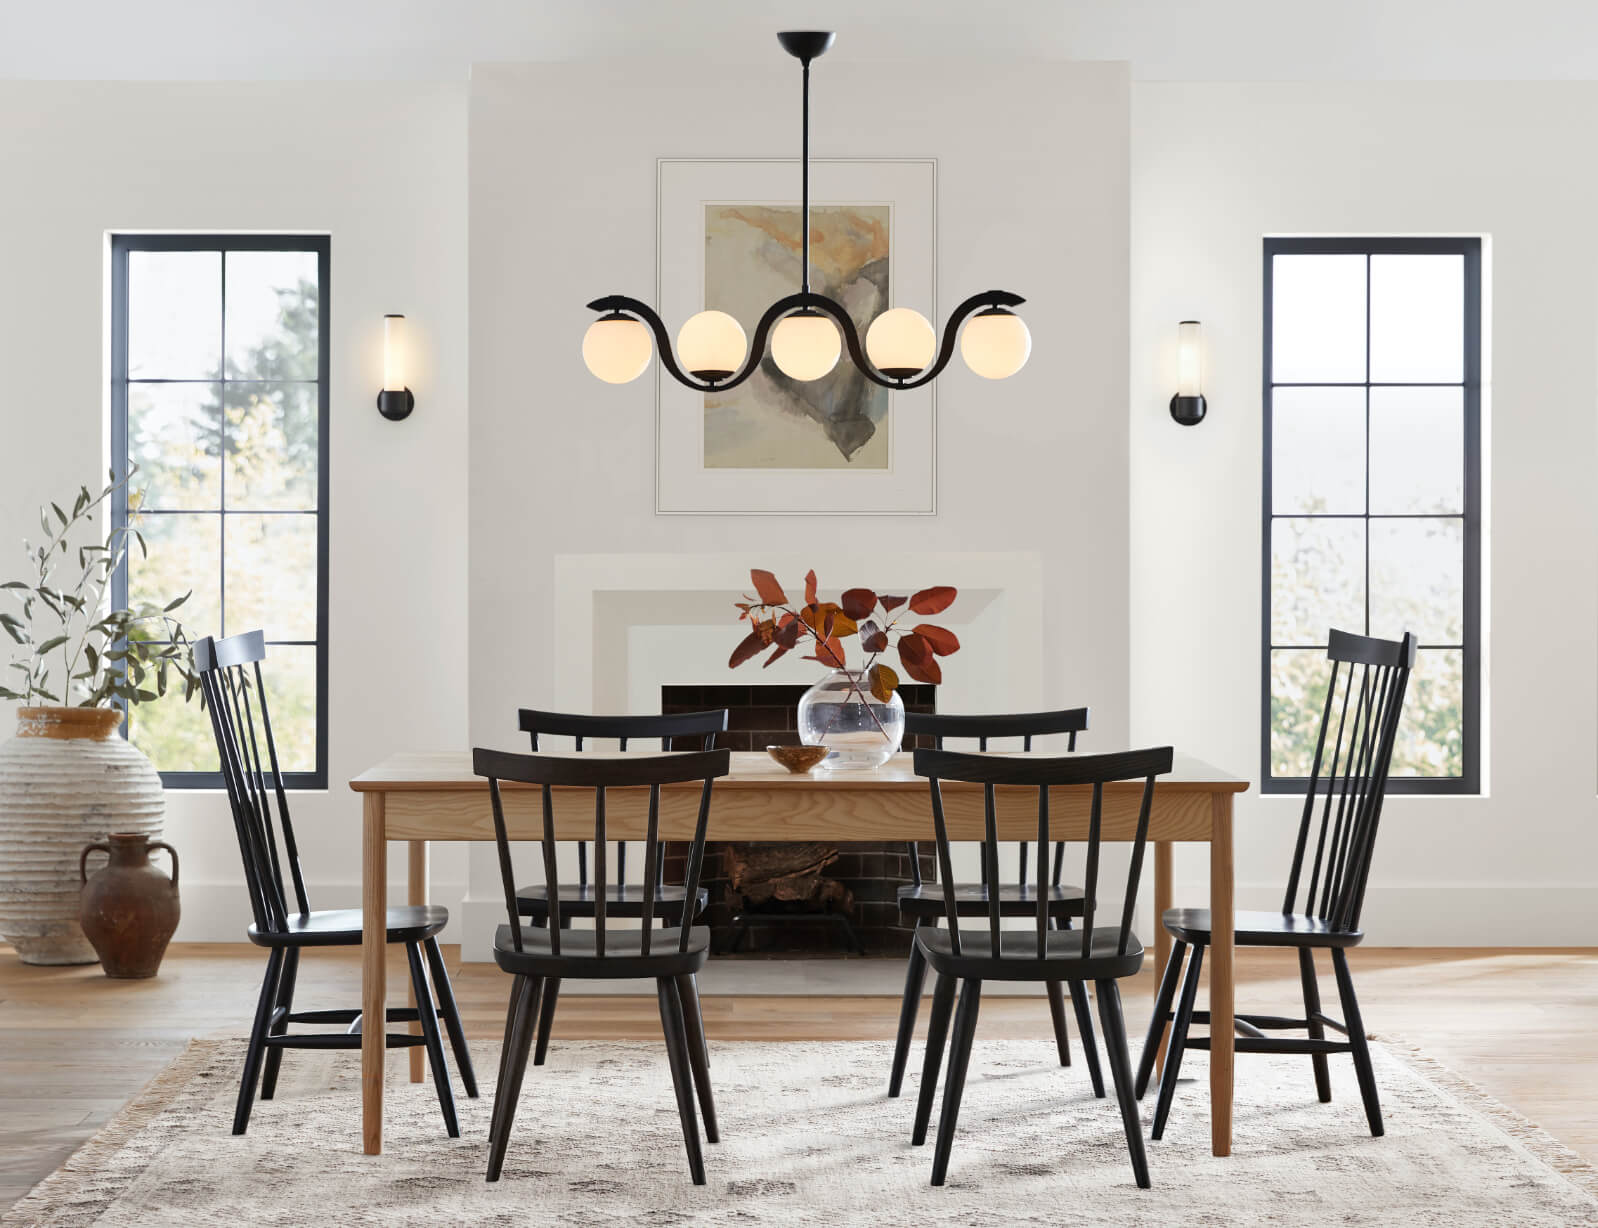 How To Choose Dining Room Lighting, How High To Hang Light Fixture Over Kitchen Table